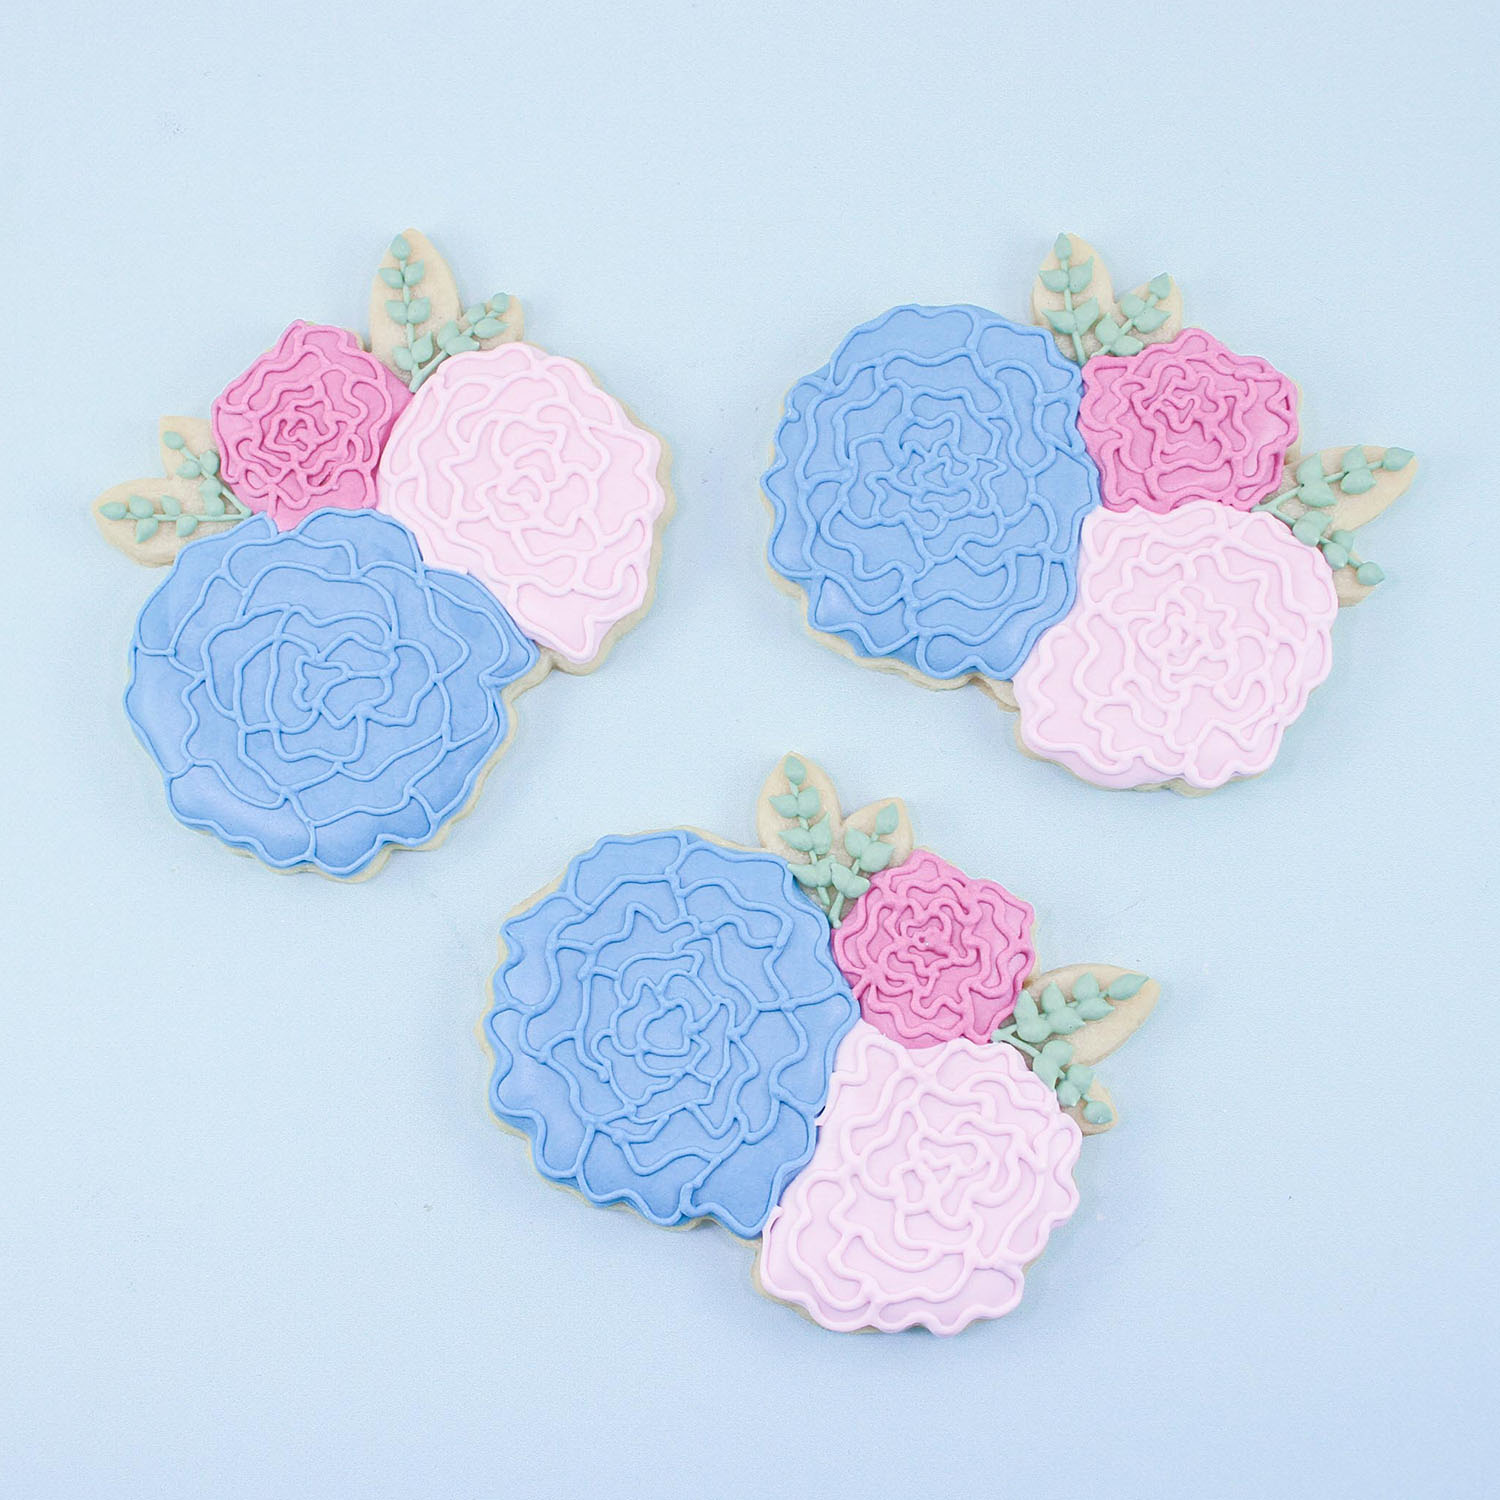 Royal Icing Decorated Sugar Cookies of Floral Clusters